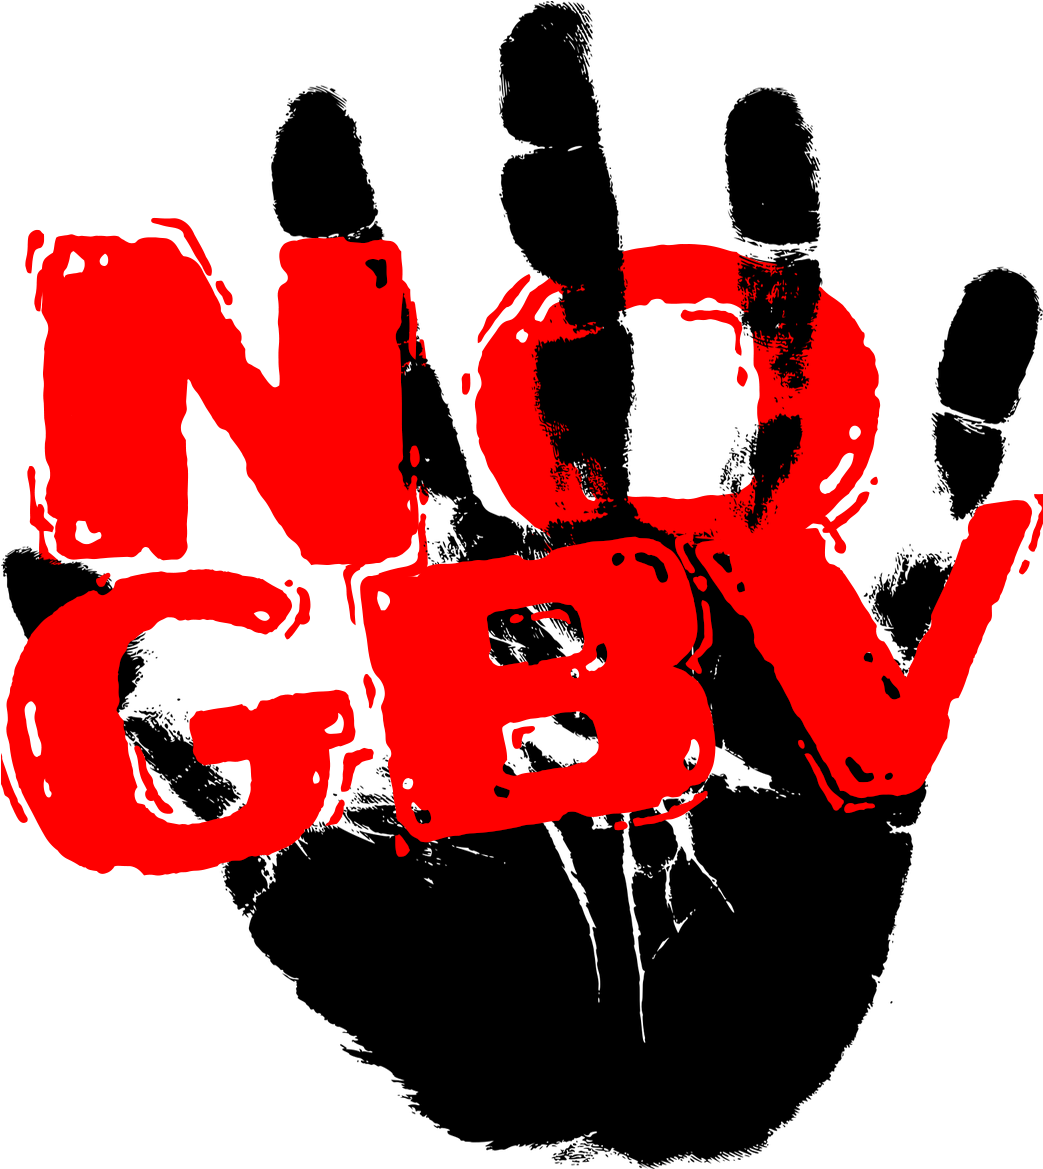 Stop G B V Campaign Graphic